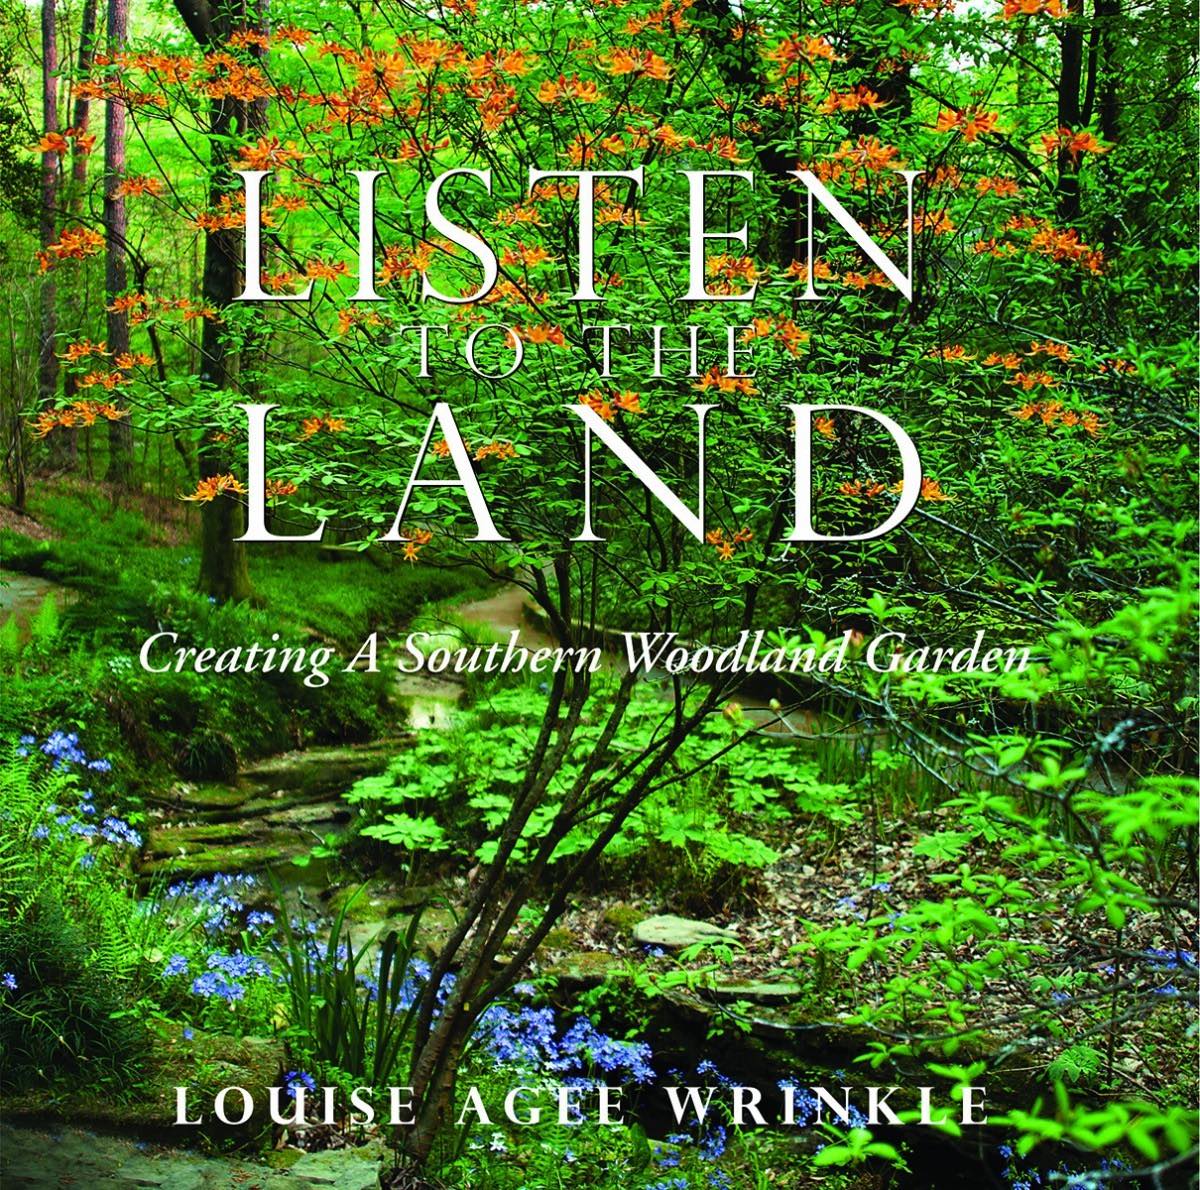 Book cover - Listen to the Land by Louise Agee Wrinkle